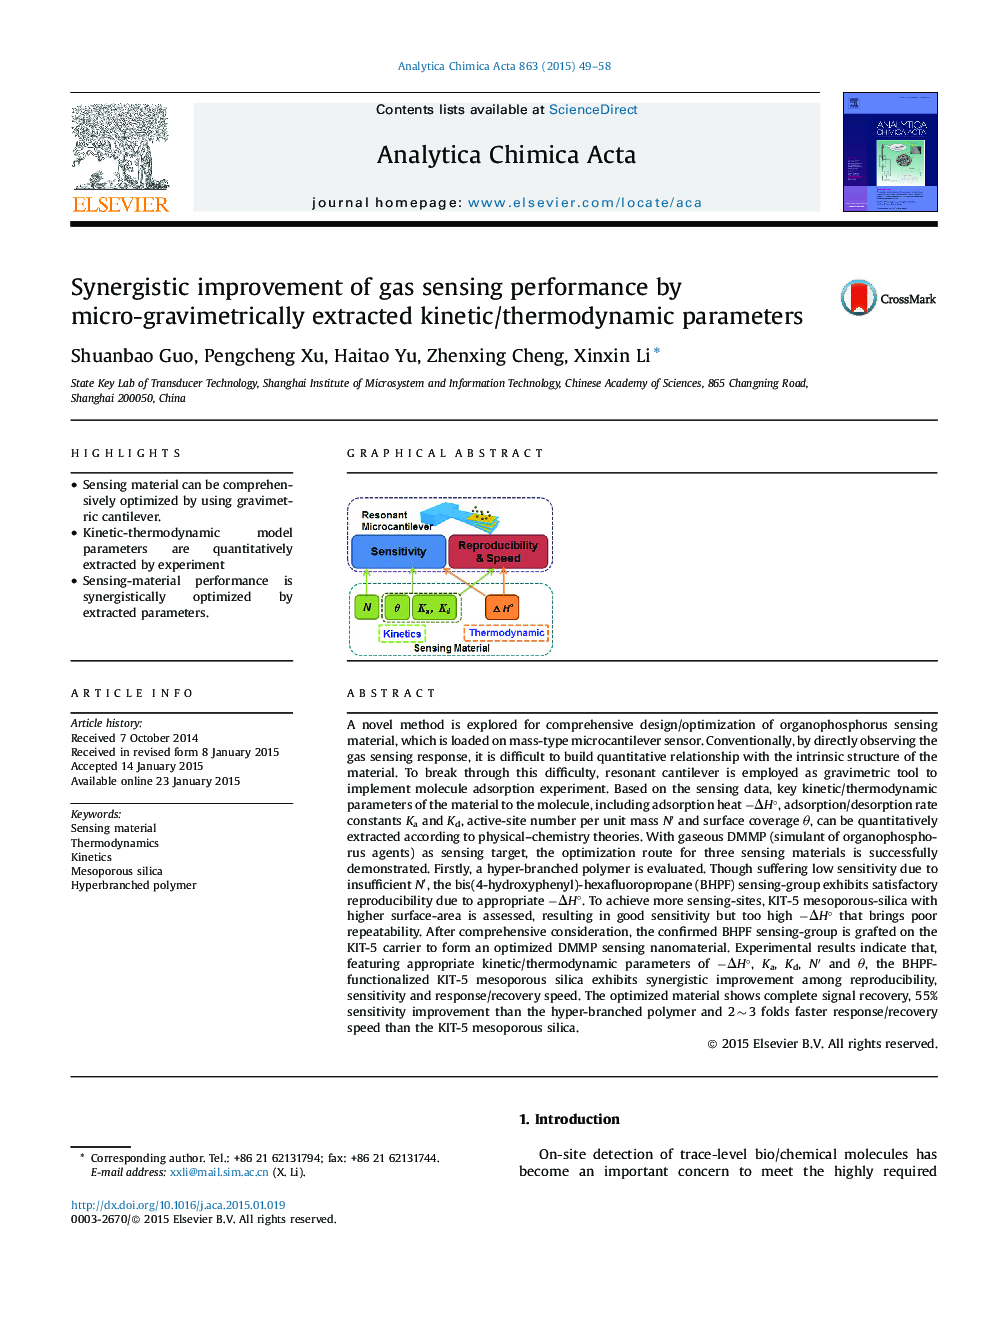 Synergistic improvement of gas sensing performance by micro-gravimetrically extracted kinetic/thermodynamic parameters